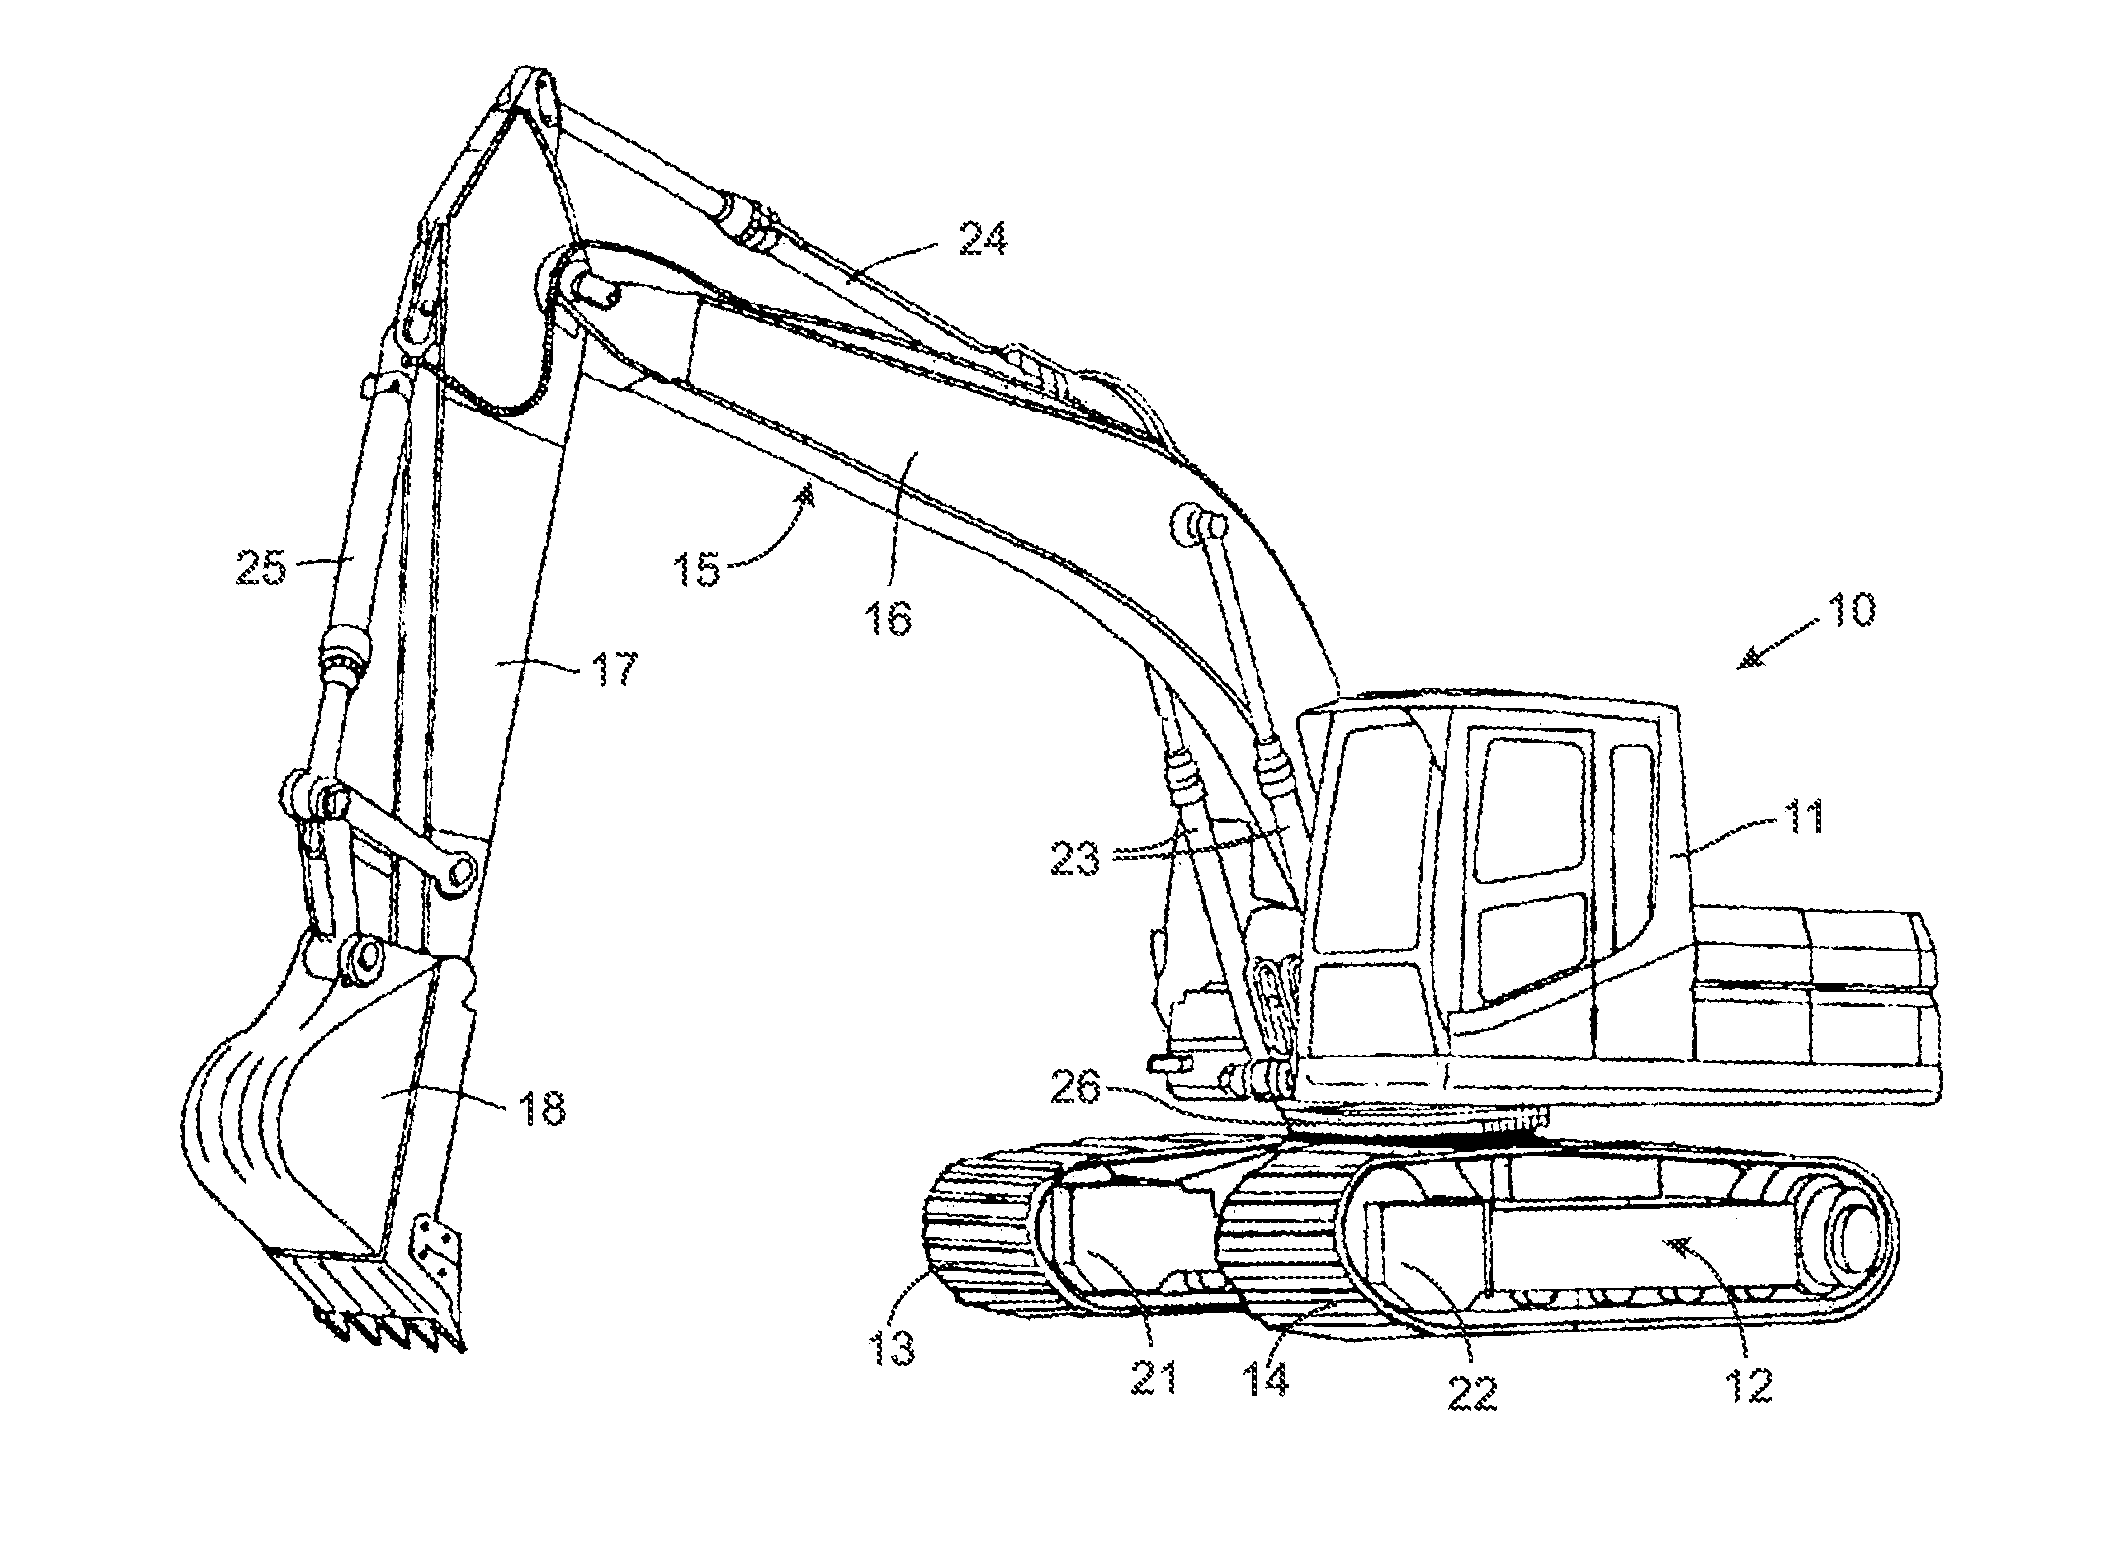 Hydraulic system with fluid flow summation control of a variable displacement pump and priority allocation of fluid flow